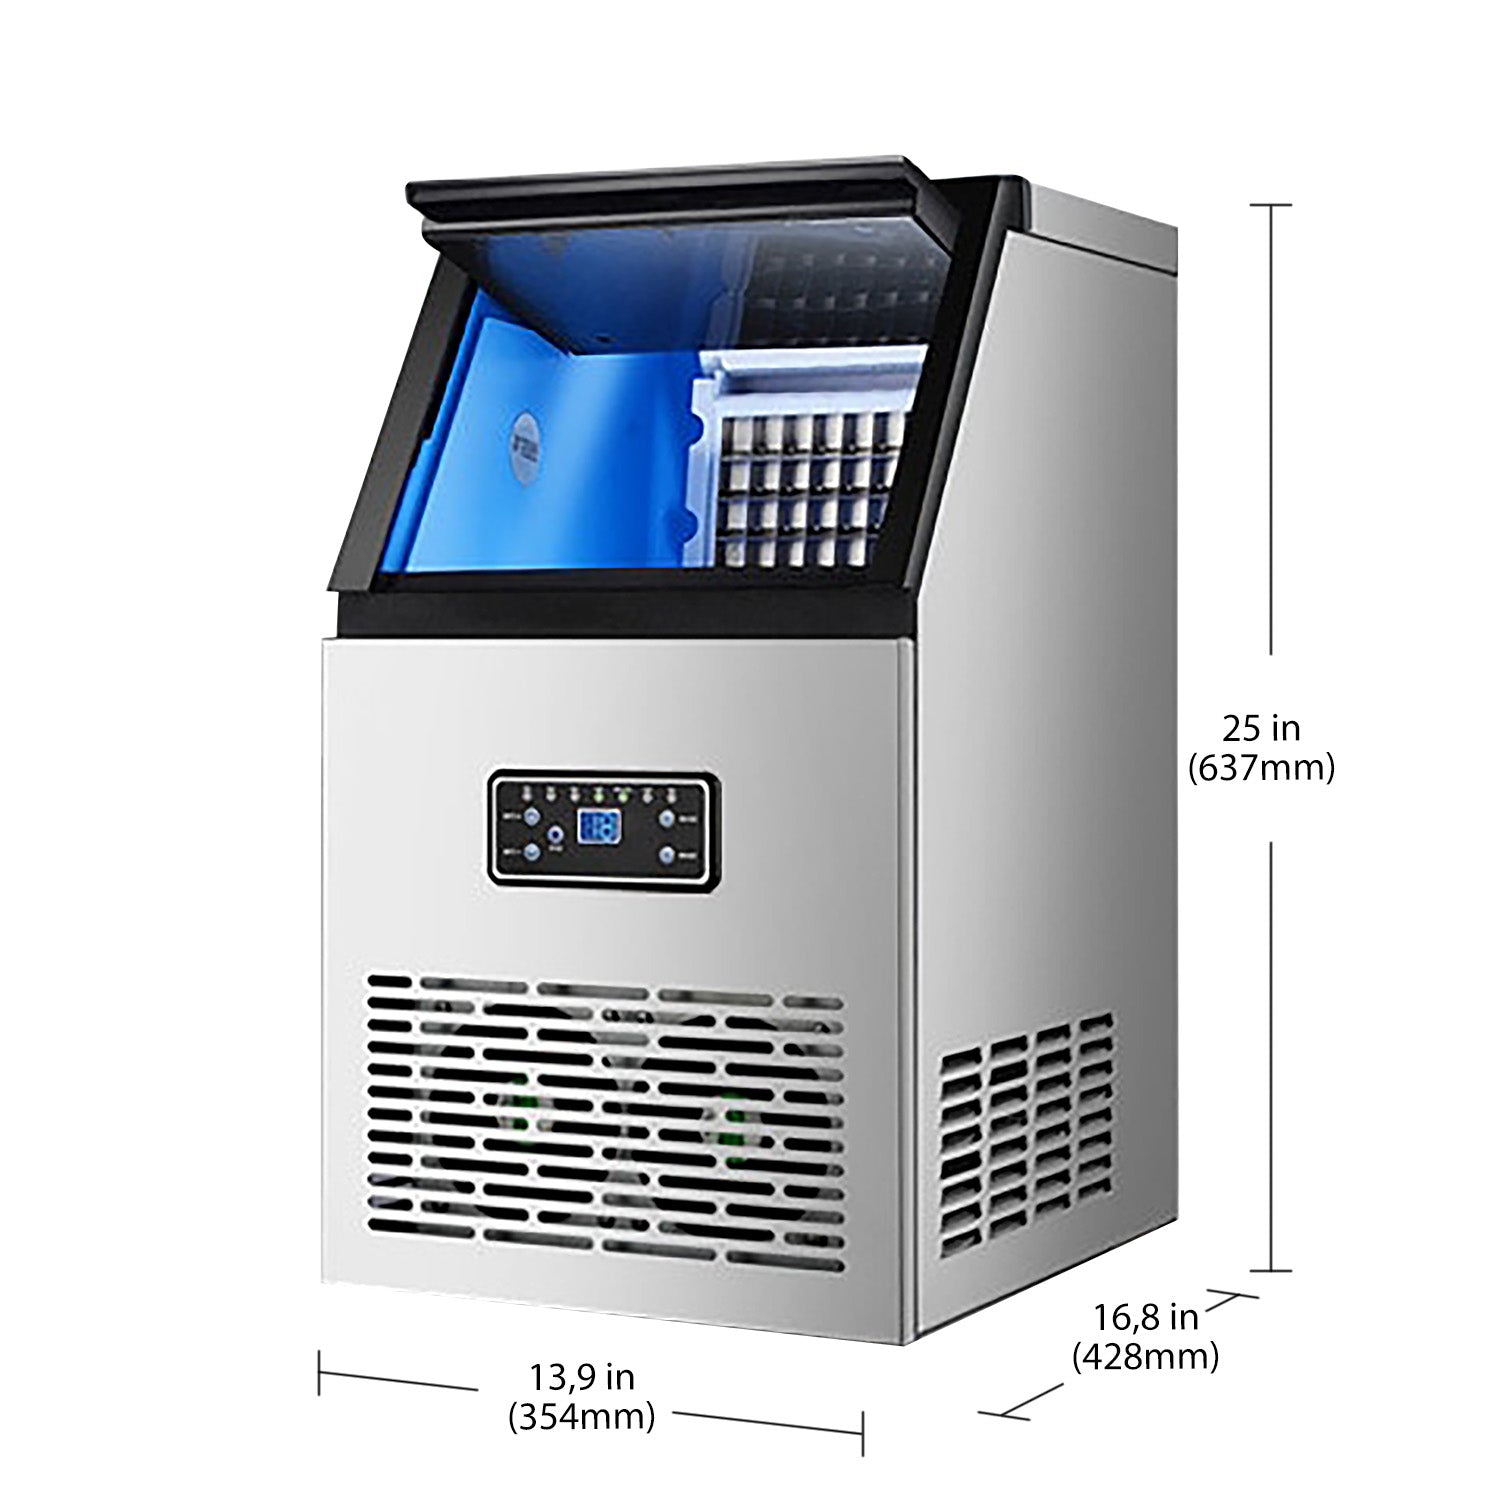 A-GK60 Electric Ice Maker | 60 KG per 24H | Automatic Ice Making Machine with Scoop and Connection Hoses